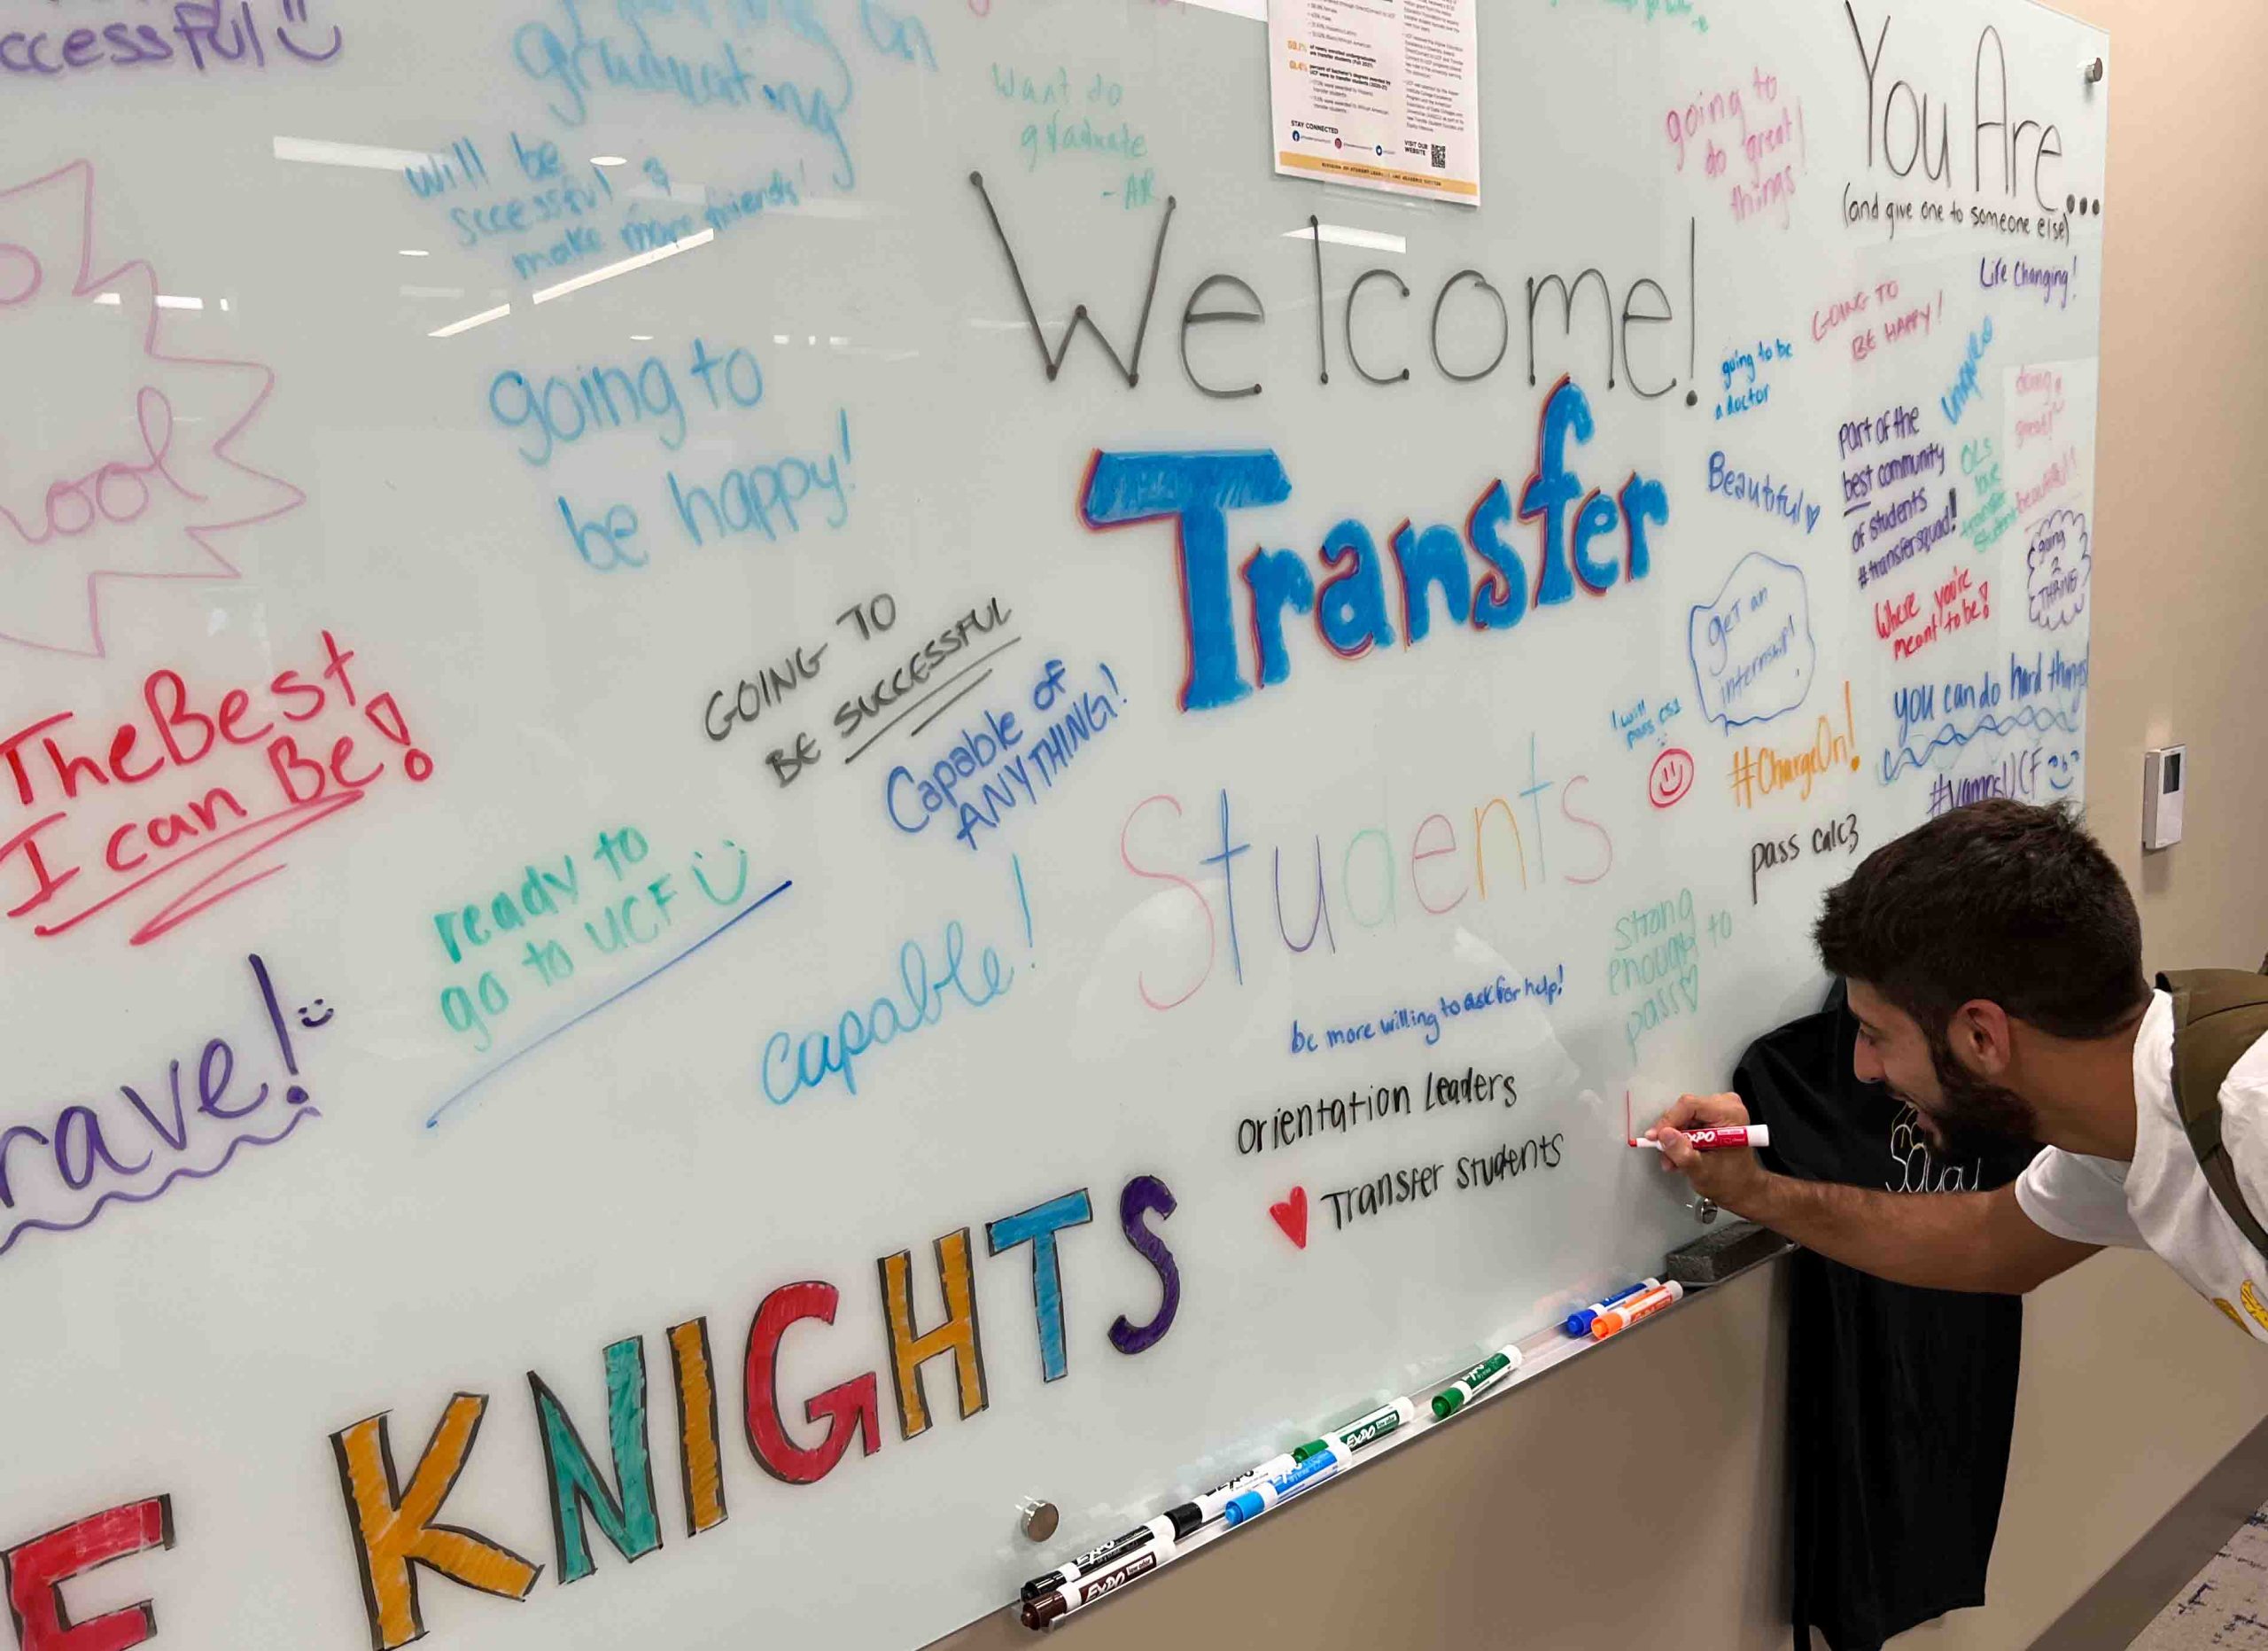 Transfer Center Whiteboard with positive messages